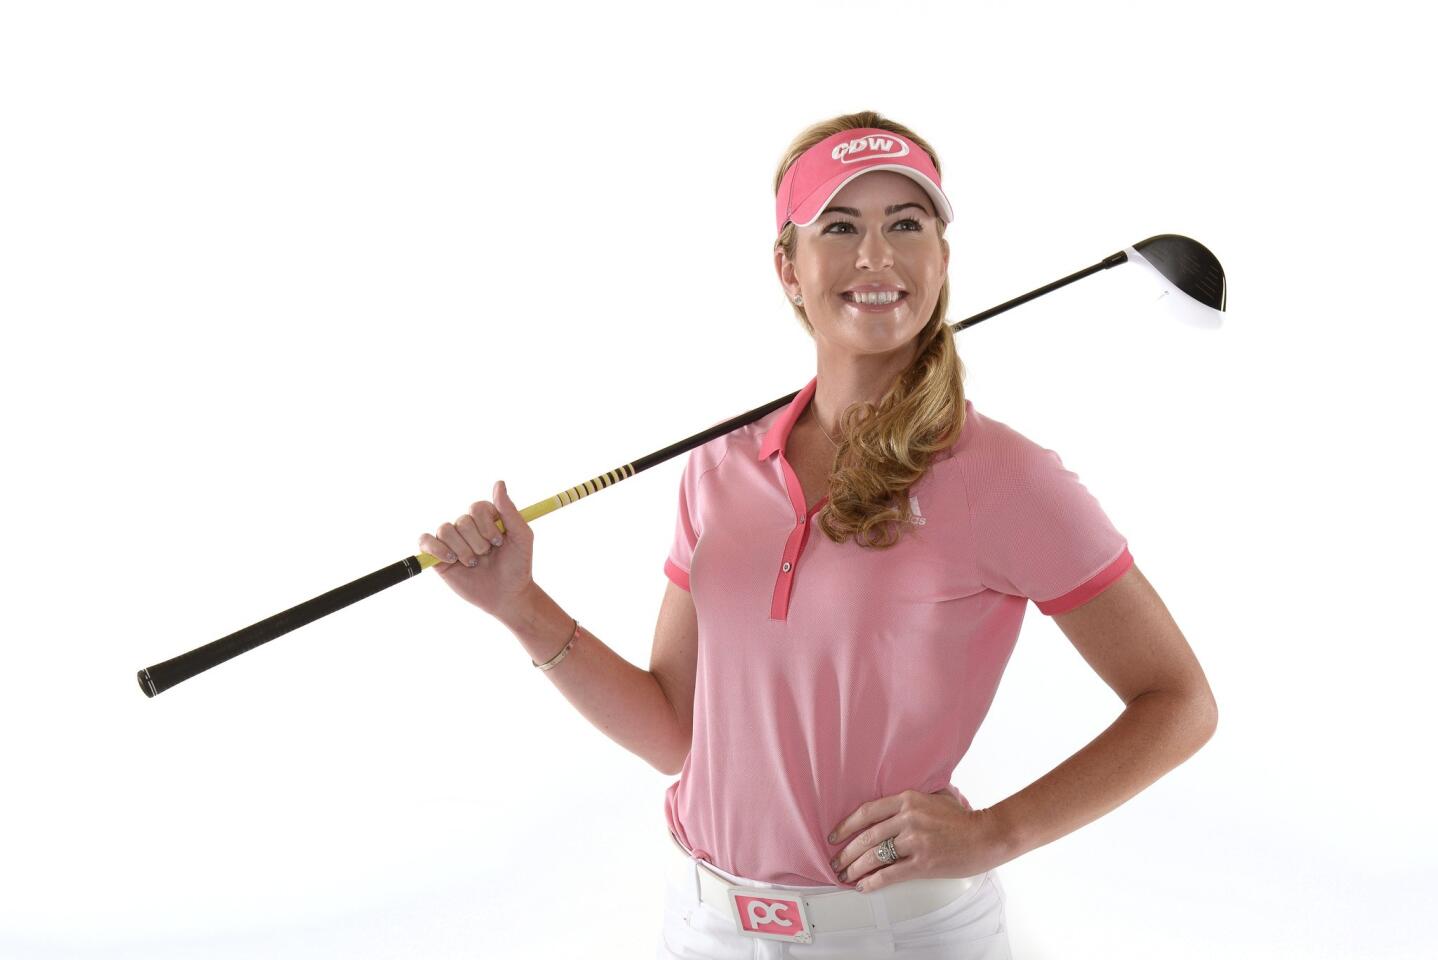 CARLSBAD, CA - MARCH 23: Paula Creamer poses for a portrait during the KIA Classic at the Park Hyatt Aviara Resort on March 23, 2016 in Carlsbad, California. (Photo by Donald Miralle/Getty Images) ** OUTS - ELSENT, FPG, CM - OUTS * NM, PH, VA if sourced by CT, LA or MoD **